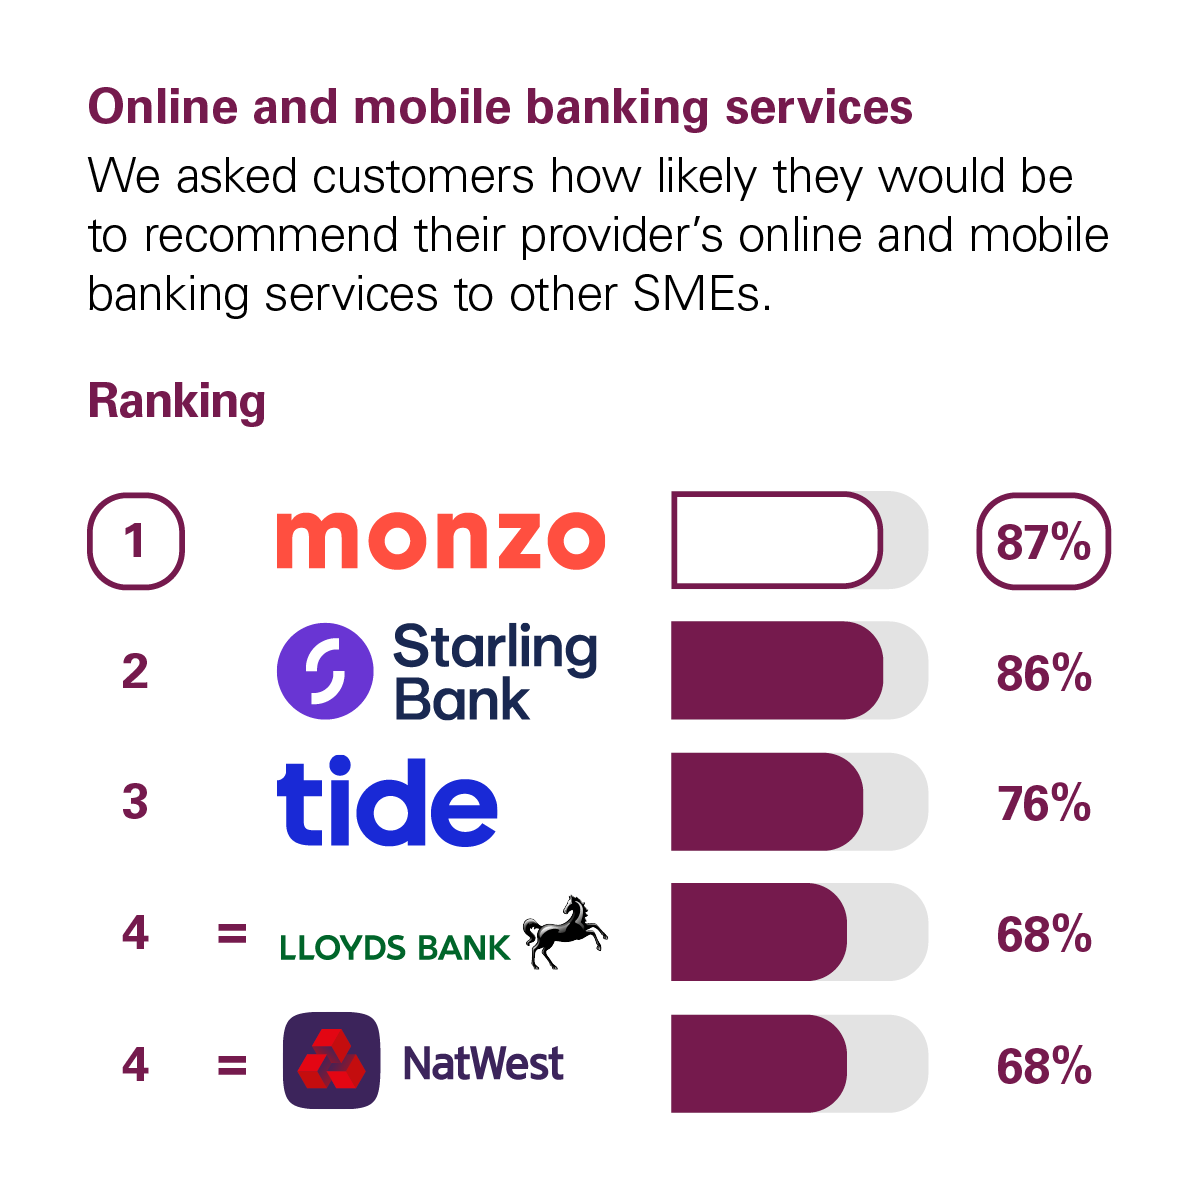 Graph showing the results of the CMA scoring of UK banks in the Online and Mobile Banking Services category. The CMA asked customers how likely they would be to recommend their provider's online and mobile banking services to other small and medium-sized enterprises (SMEs*). The rankings with percentage scores are: 1st Monzo with 87%. 2nd Starling Bank with 86%. 3rd Tide with 76%. Joint 4th are Lloyds Bank and NatWest with 68%.